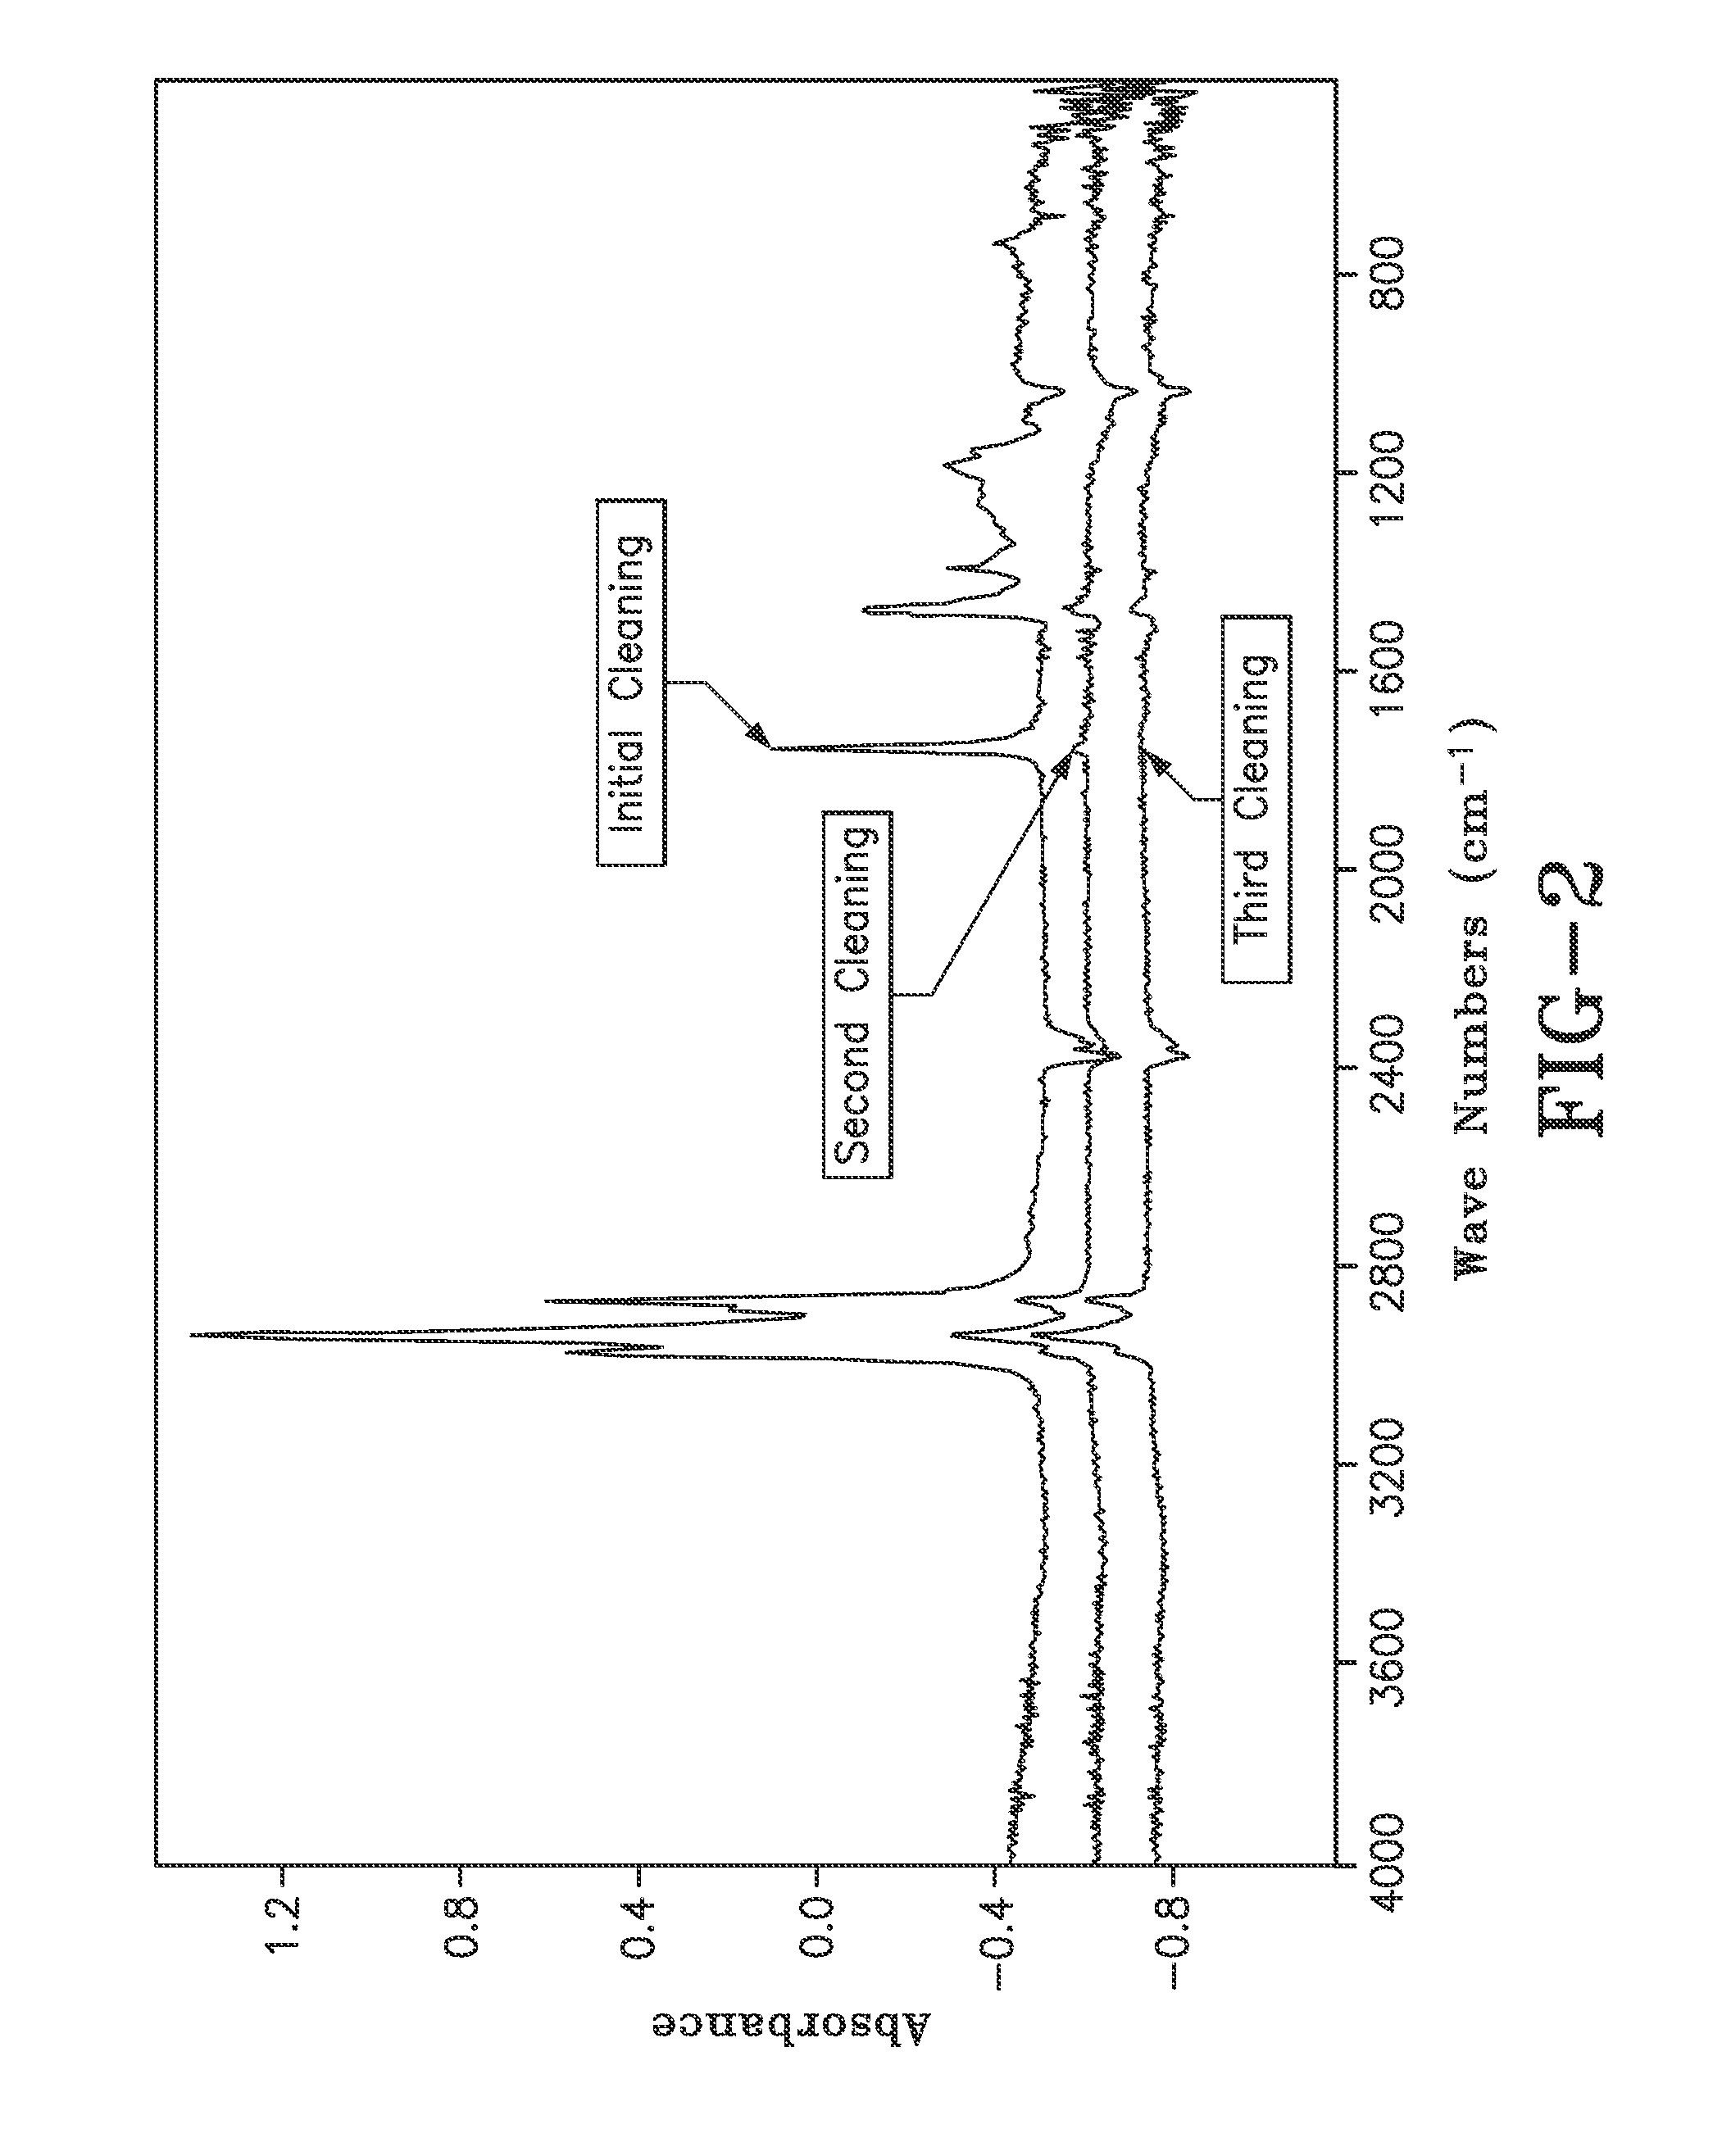 Composition and method for cleaning and removing oleaginous materials from composites